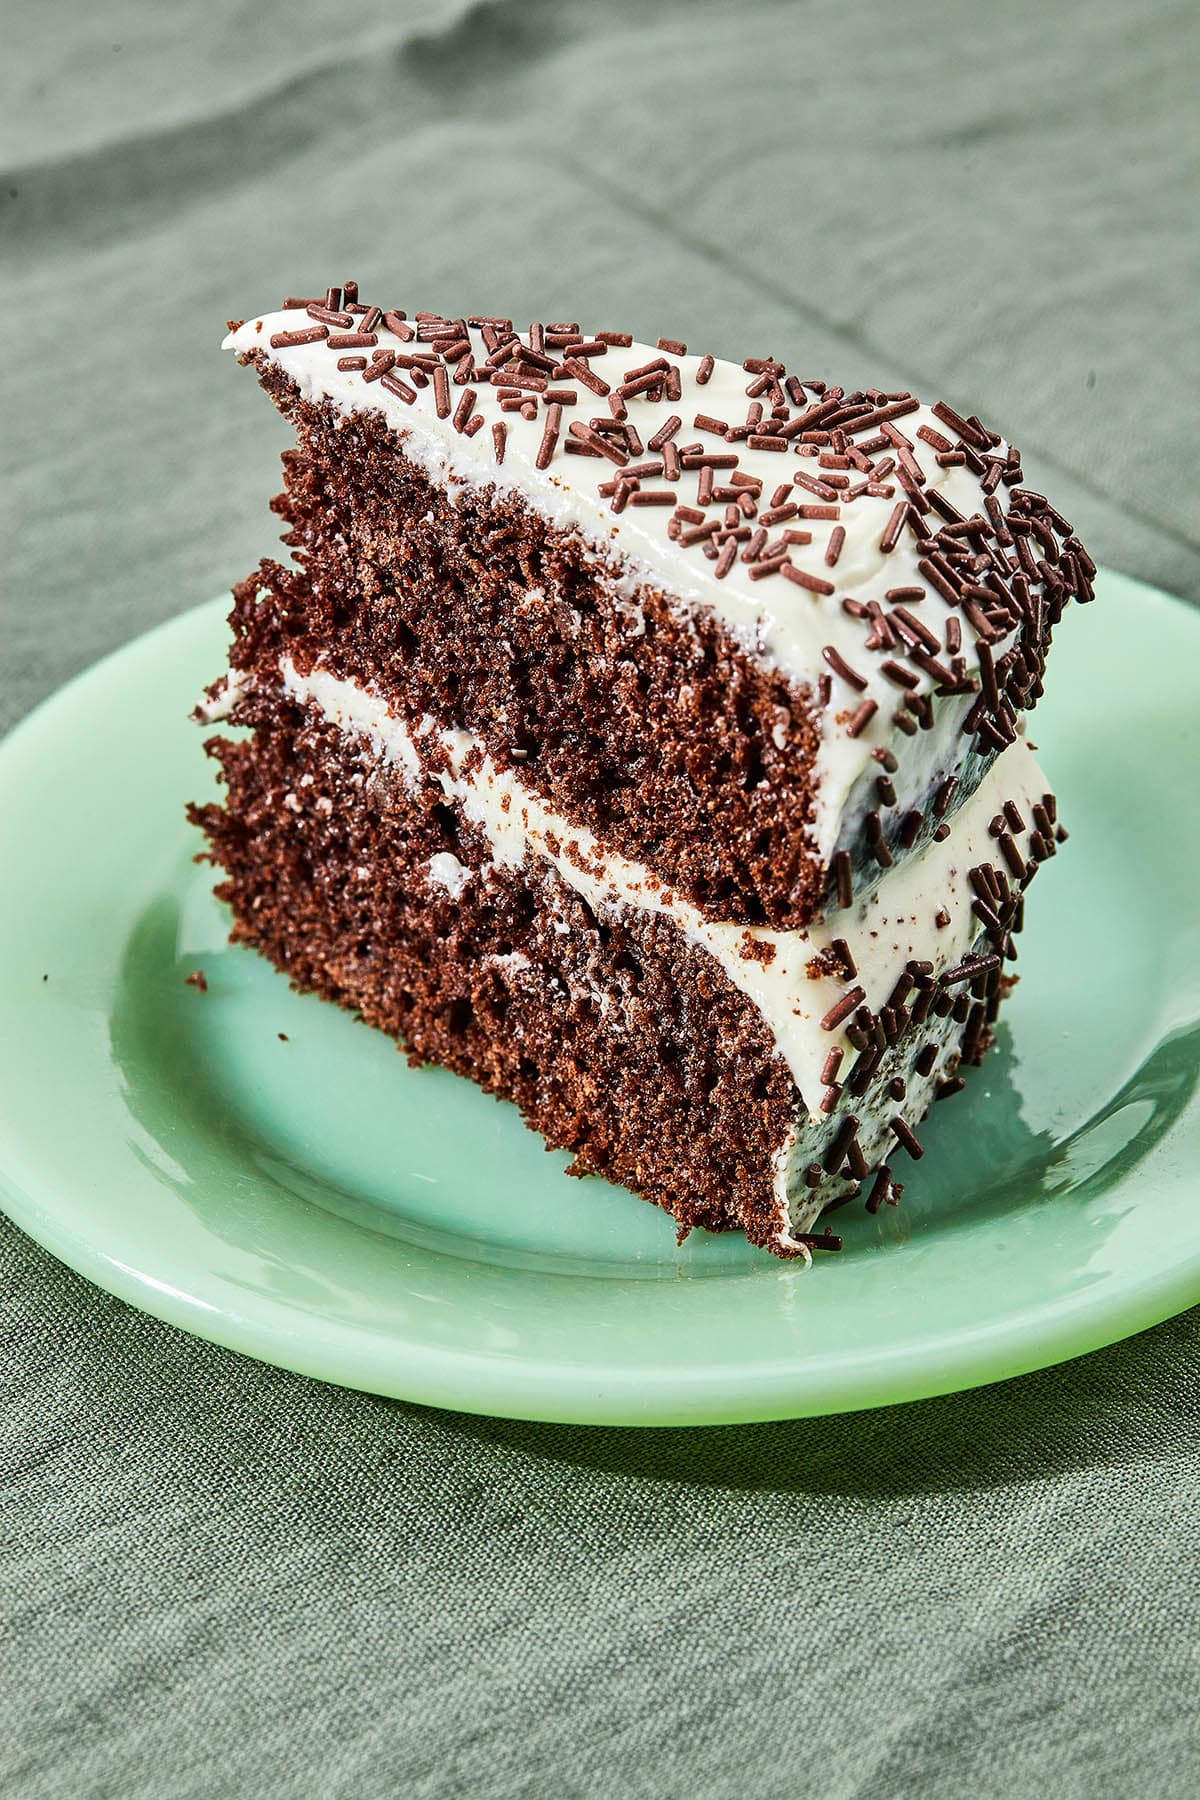 A big slice of two-layer chocolate cake with white frosting and sprinkles on a green plate.